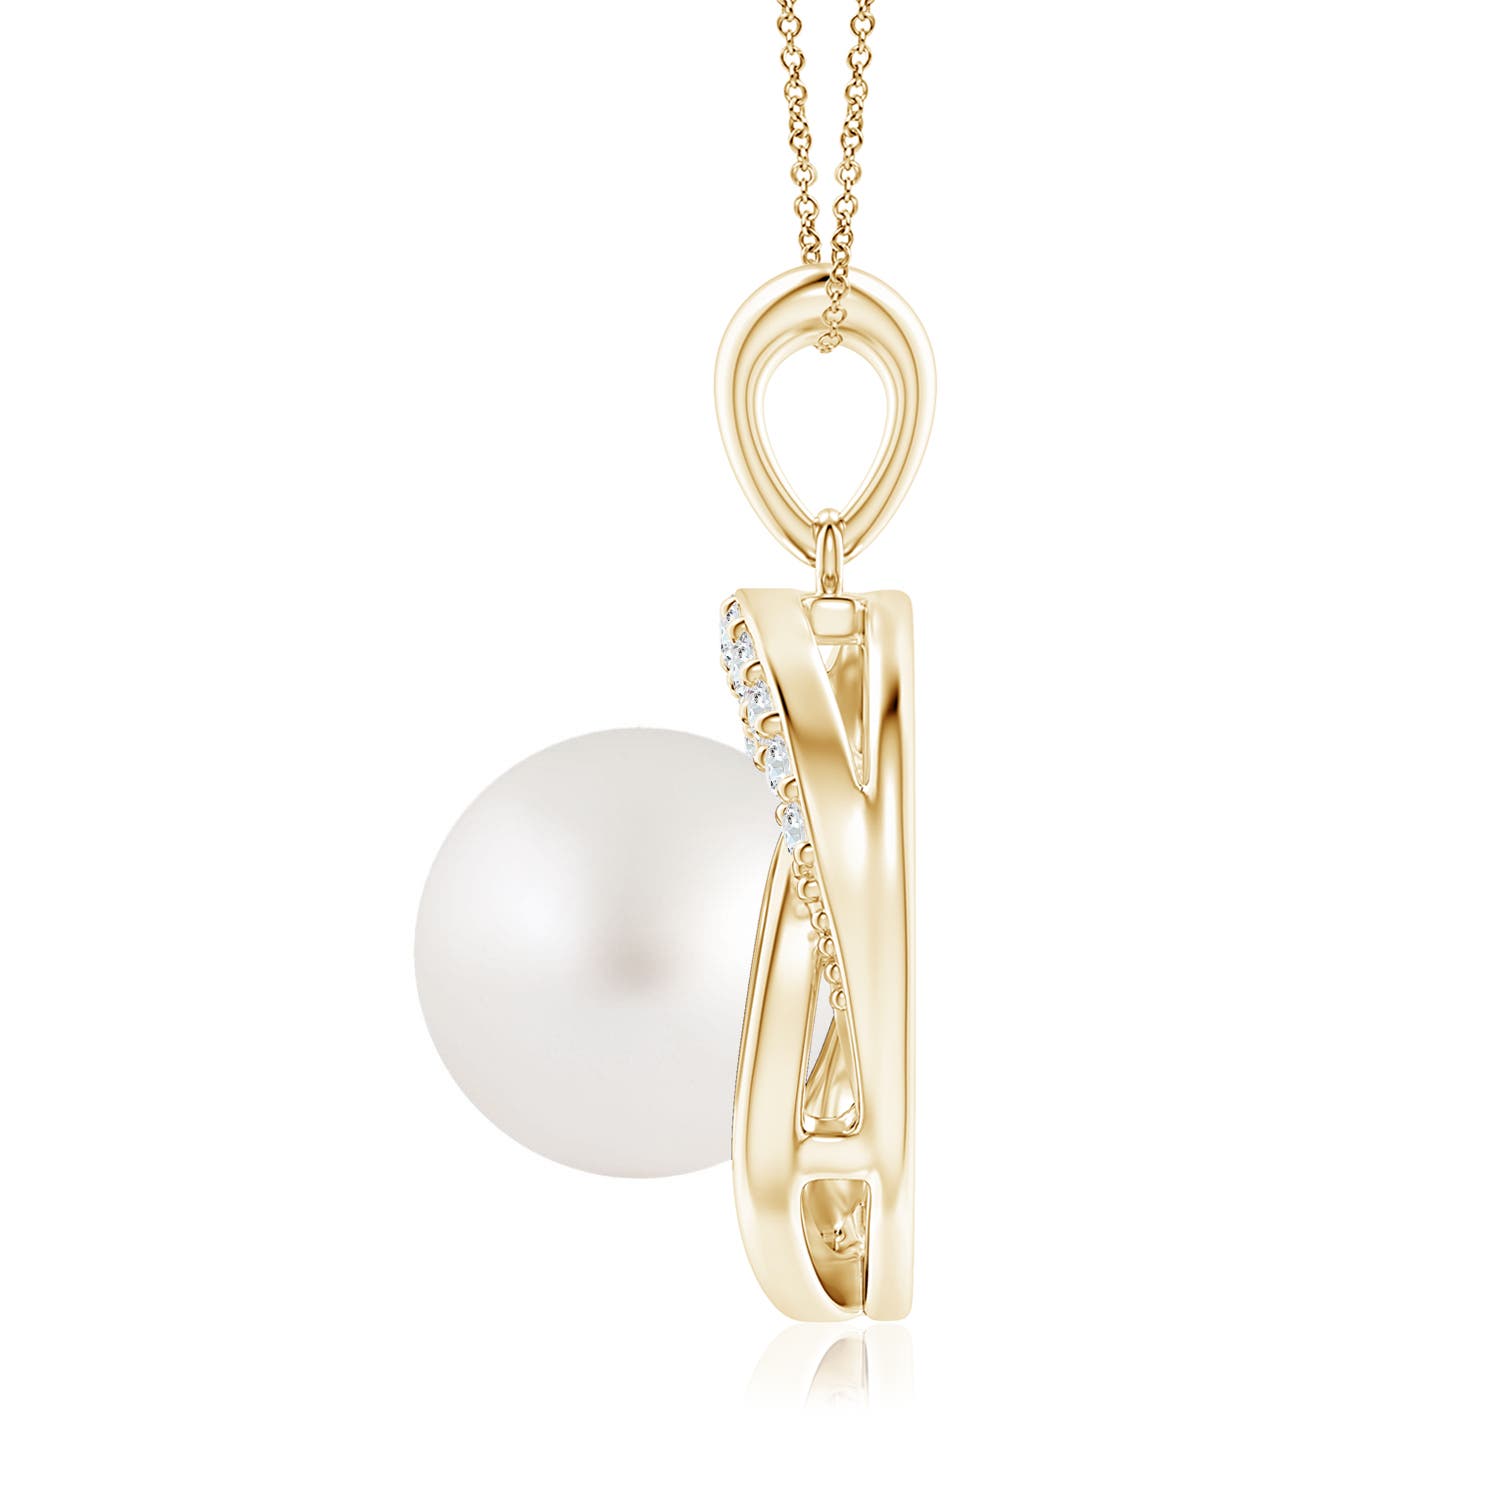 AA - South Sea Cultured Pearl / 7.33 CT / 14 KT Yellow Gold